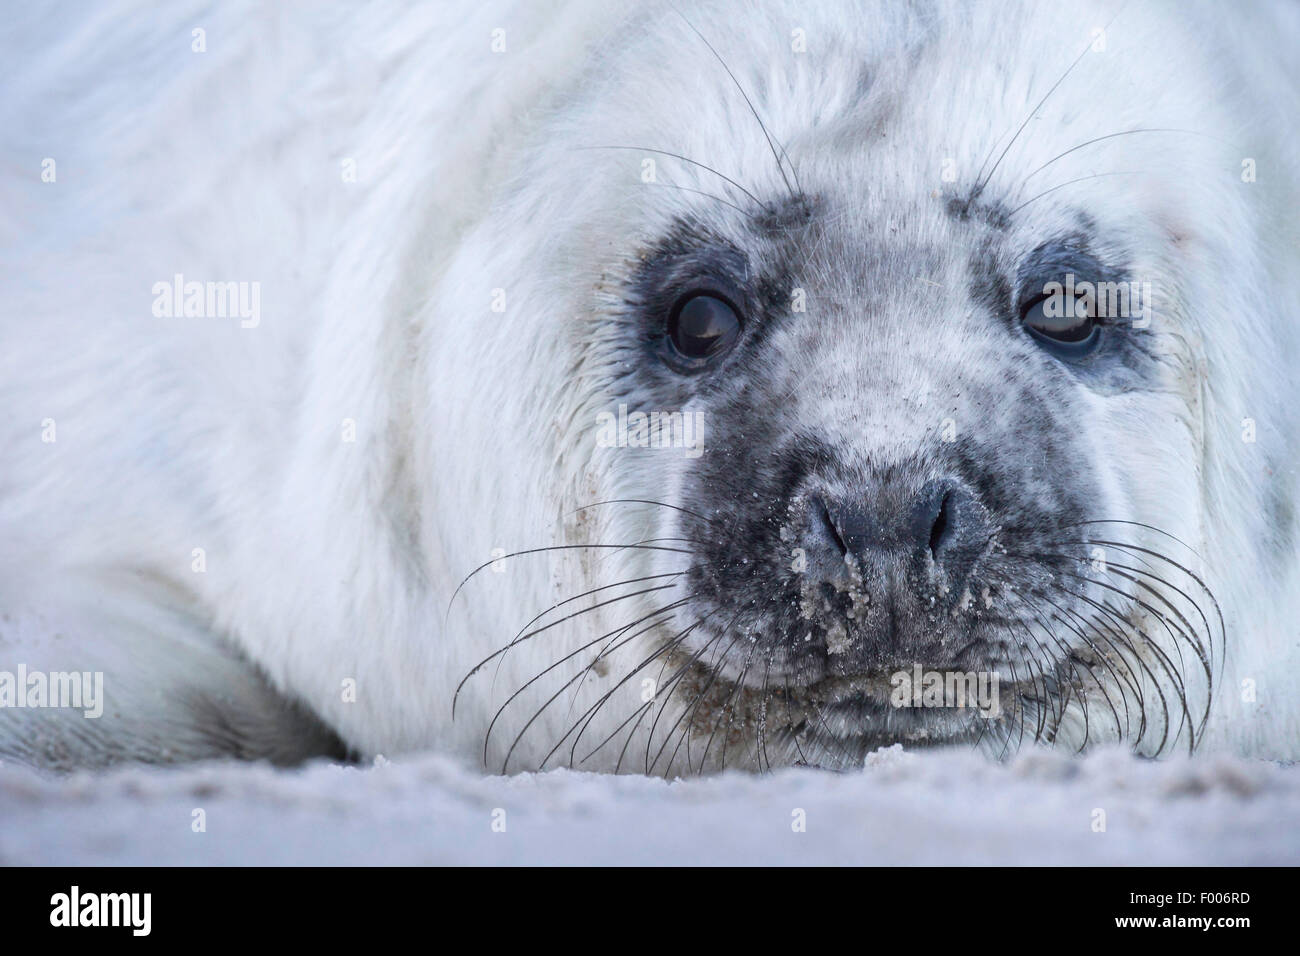 gray seal (Halichoerus grypus), portrait of a baby seal, Germany, Schleswig-Holstein, Heligoland Stock Photo